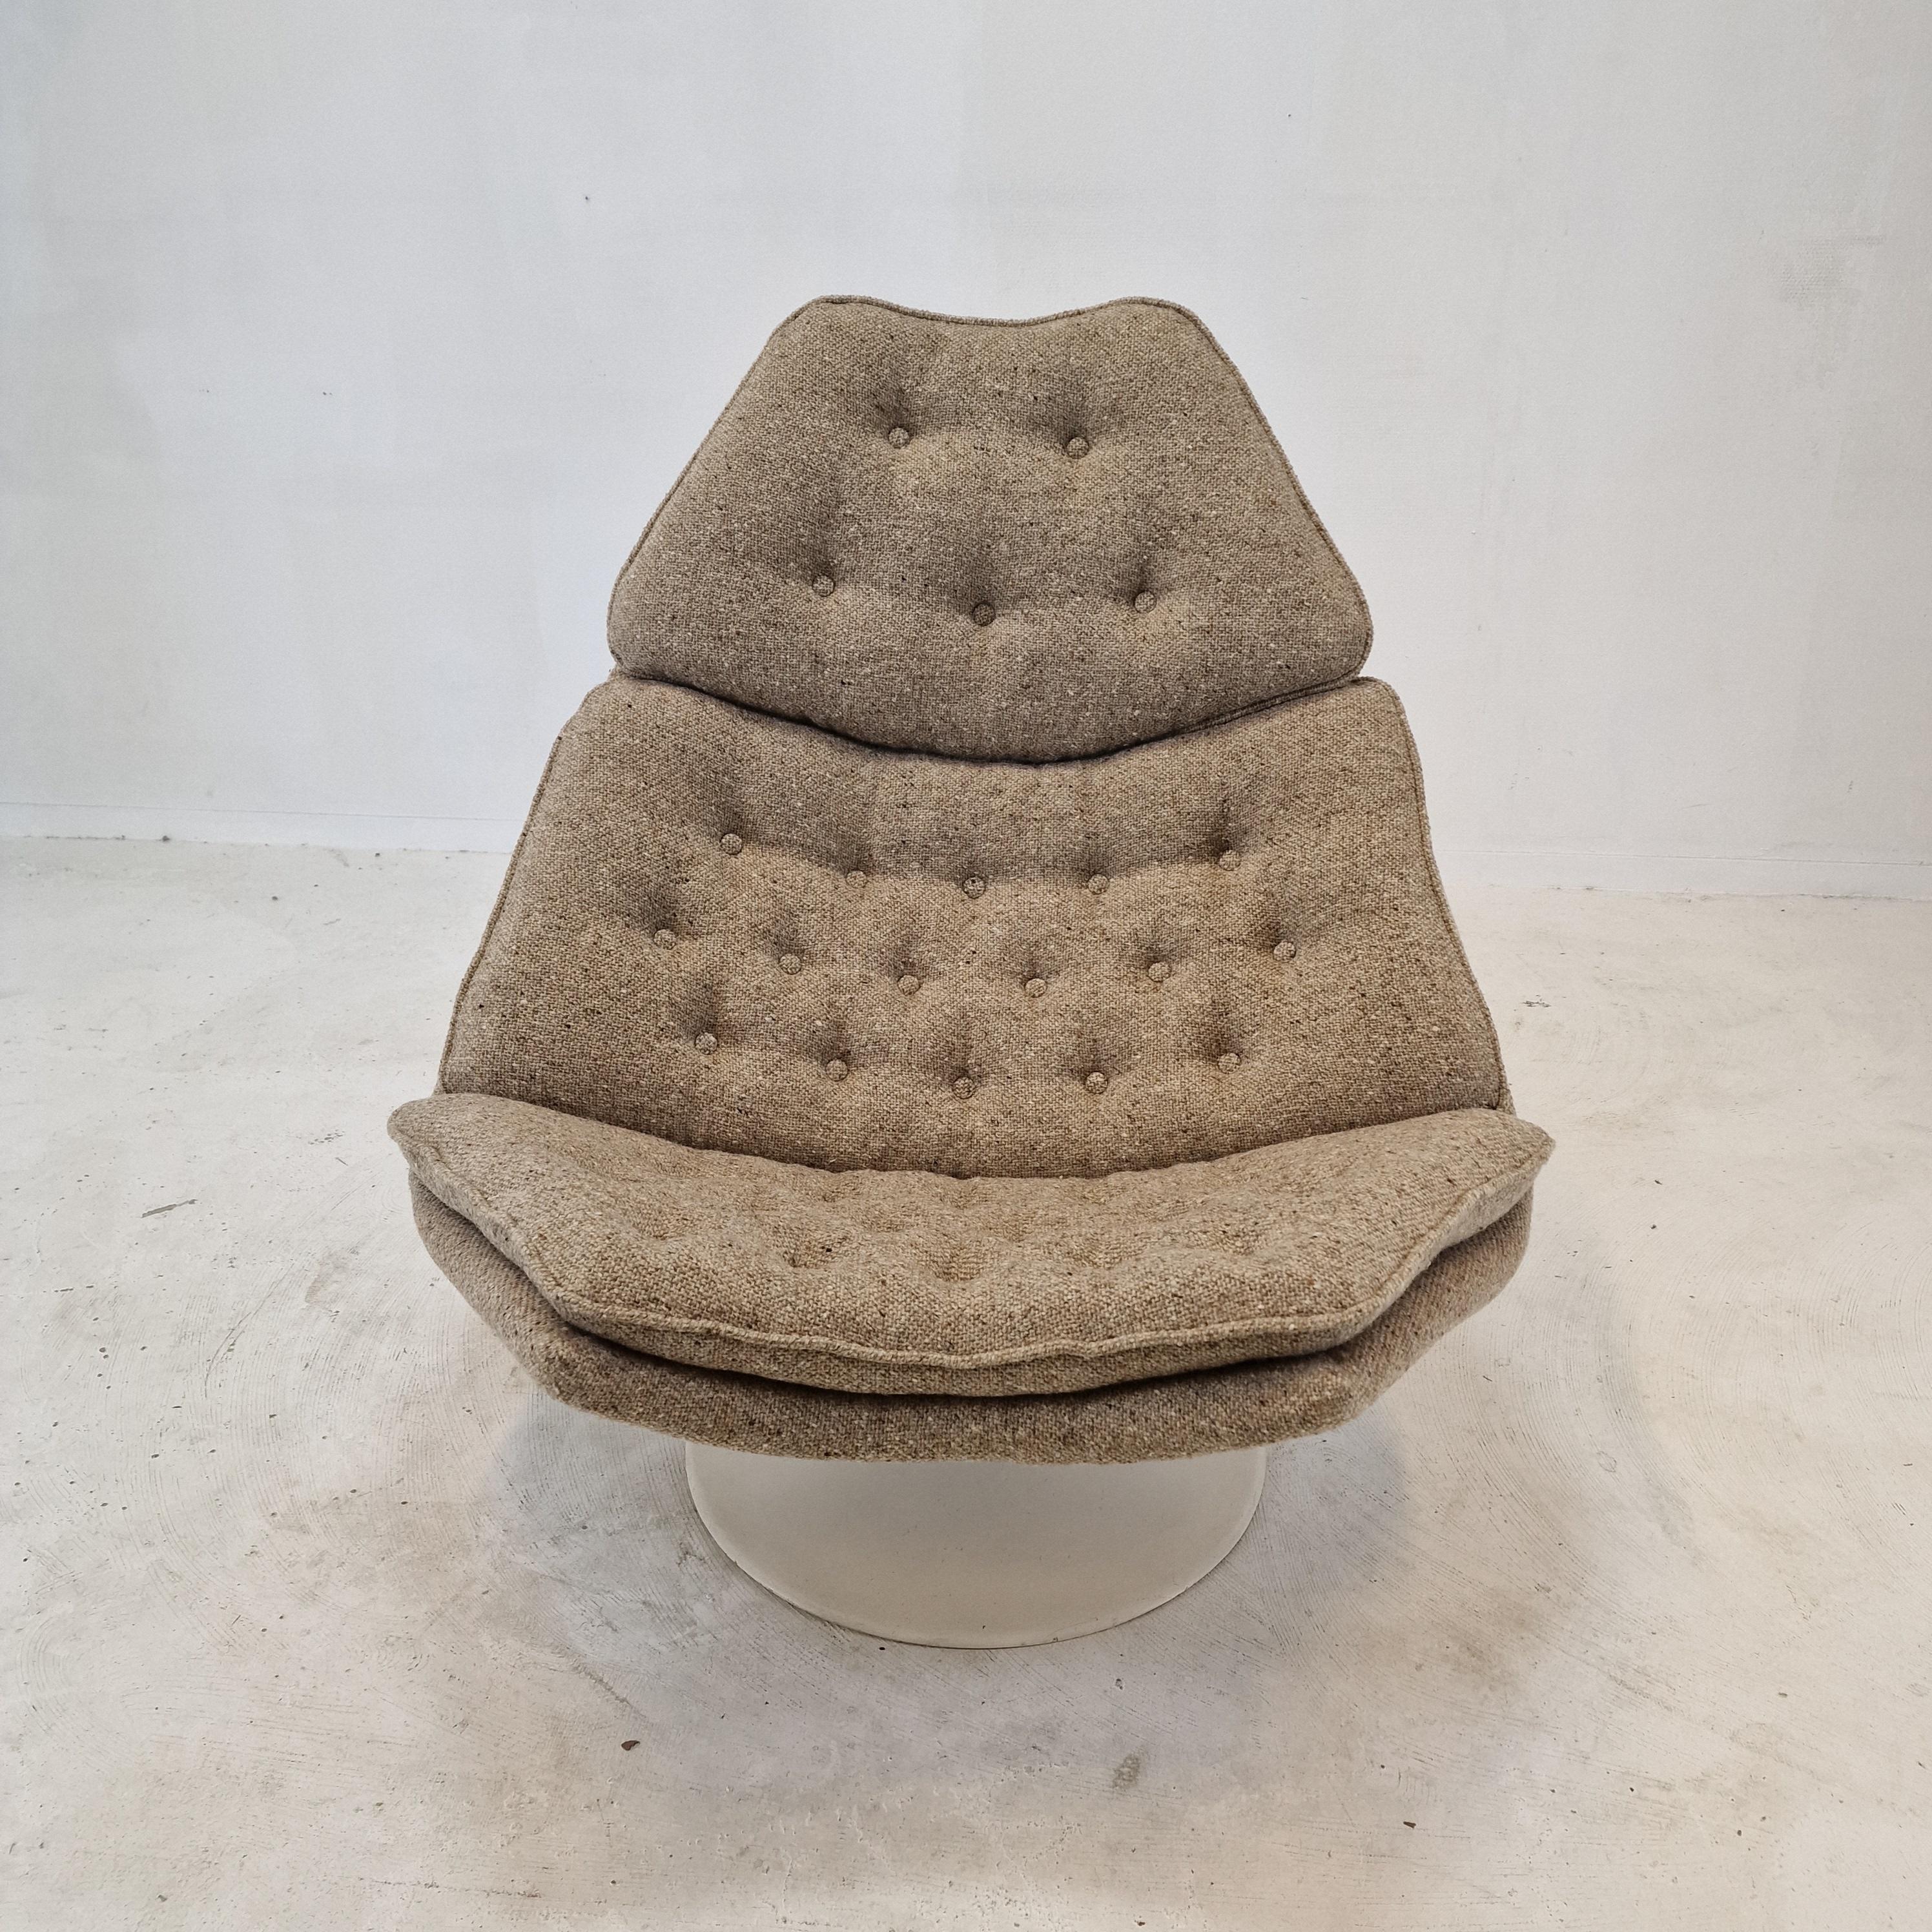 Dutch F588 Lounge Chair by Geoffrey Harcourt for Artifort, 1960s For Sale